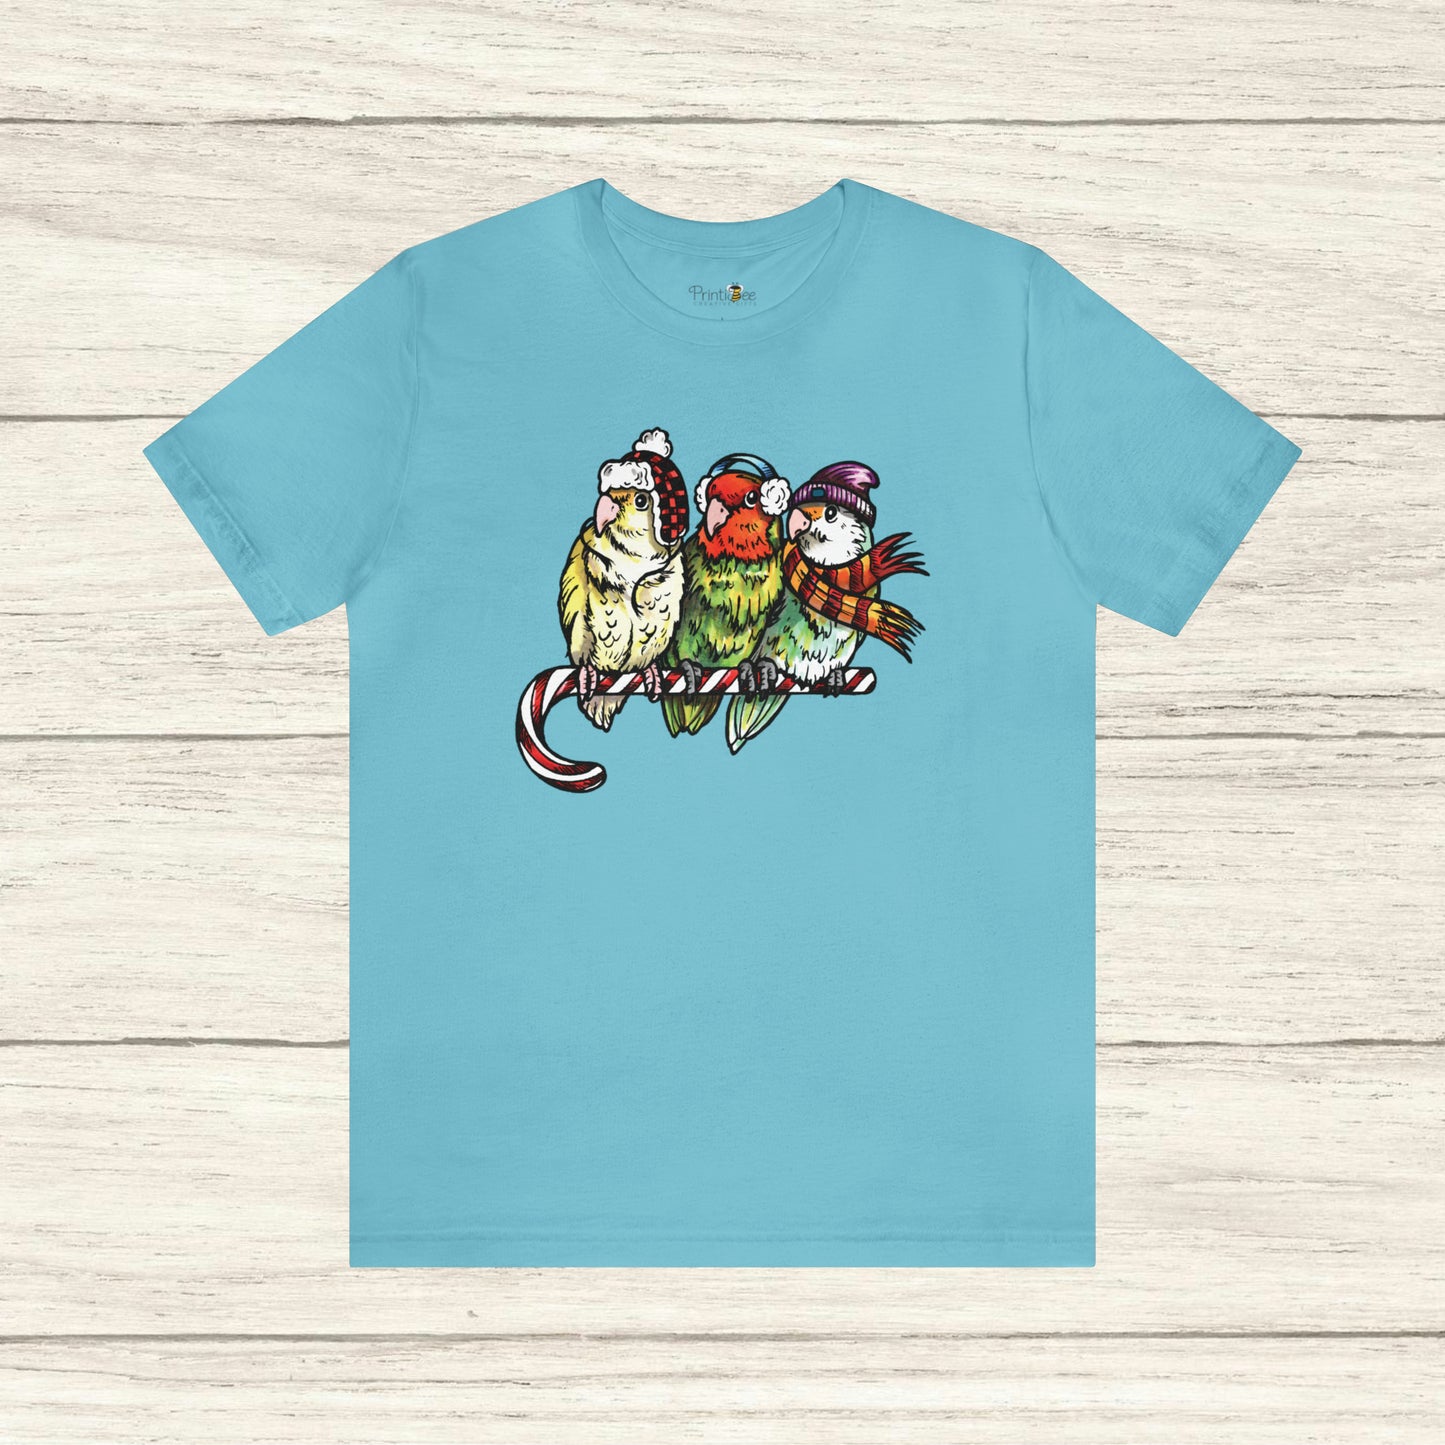 3 Lovebirds in Winter Wear & Perched on a Candy Cane, Tee